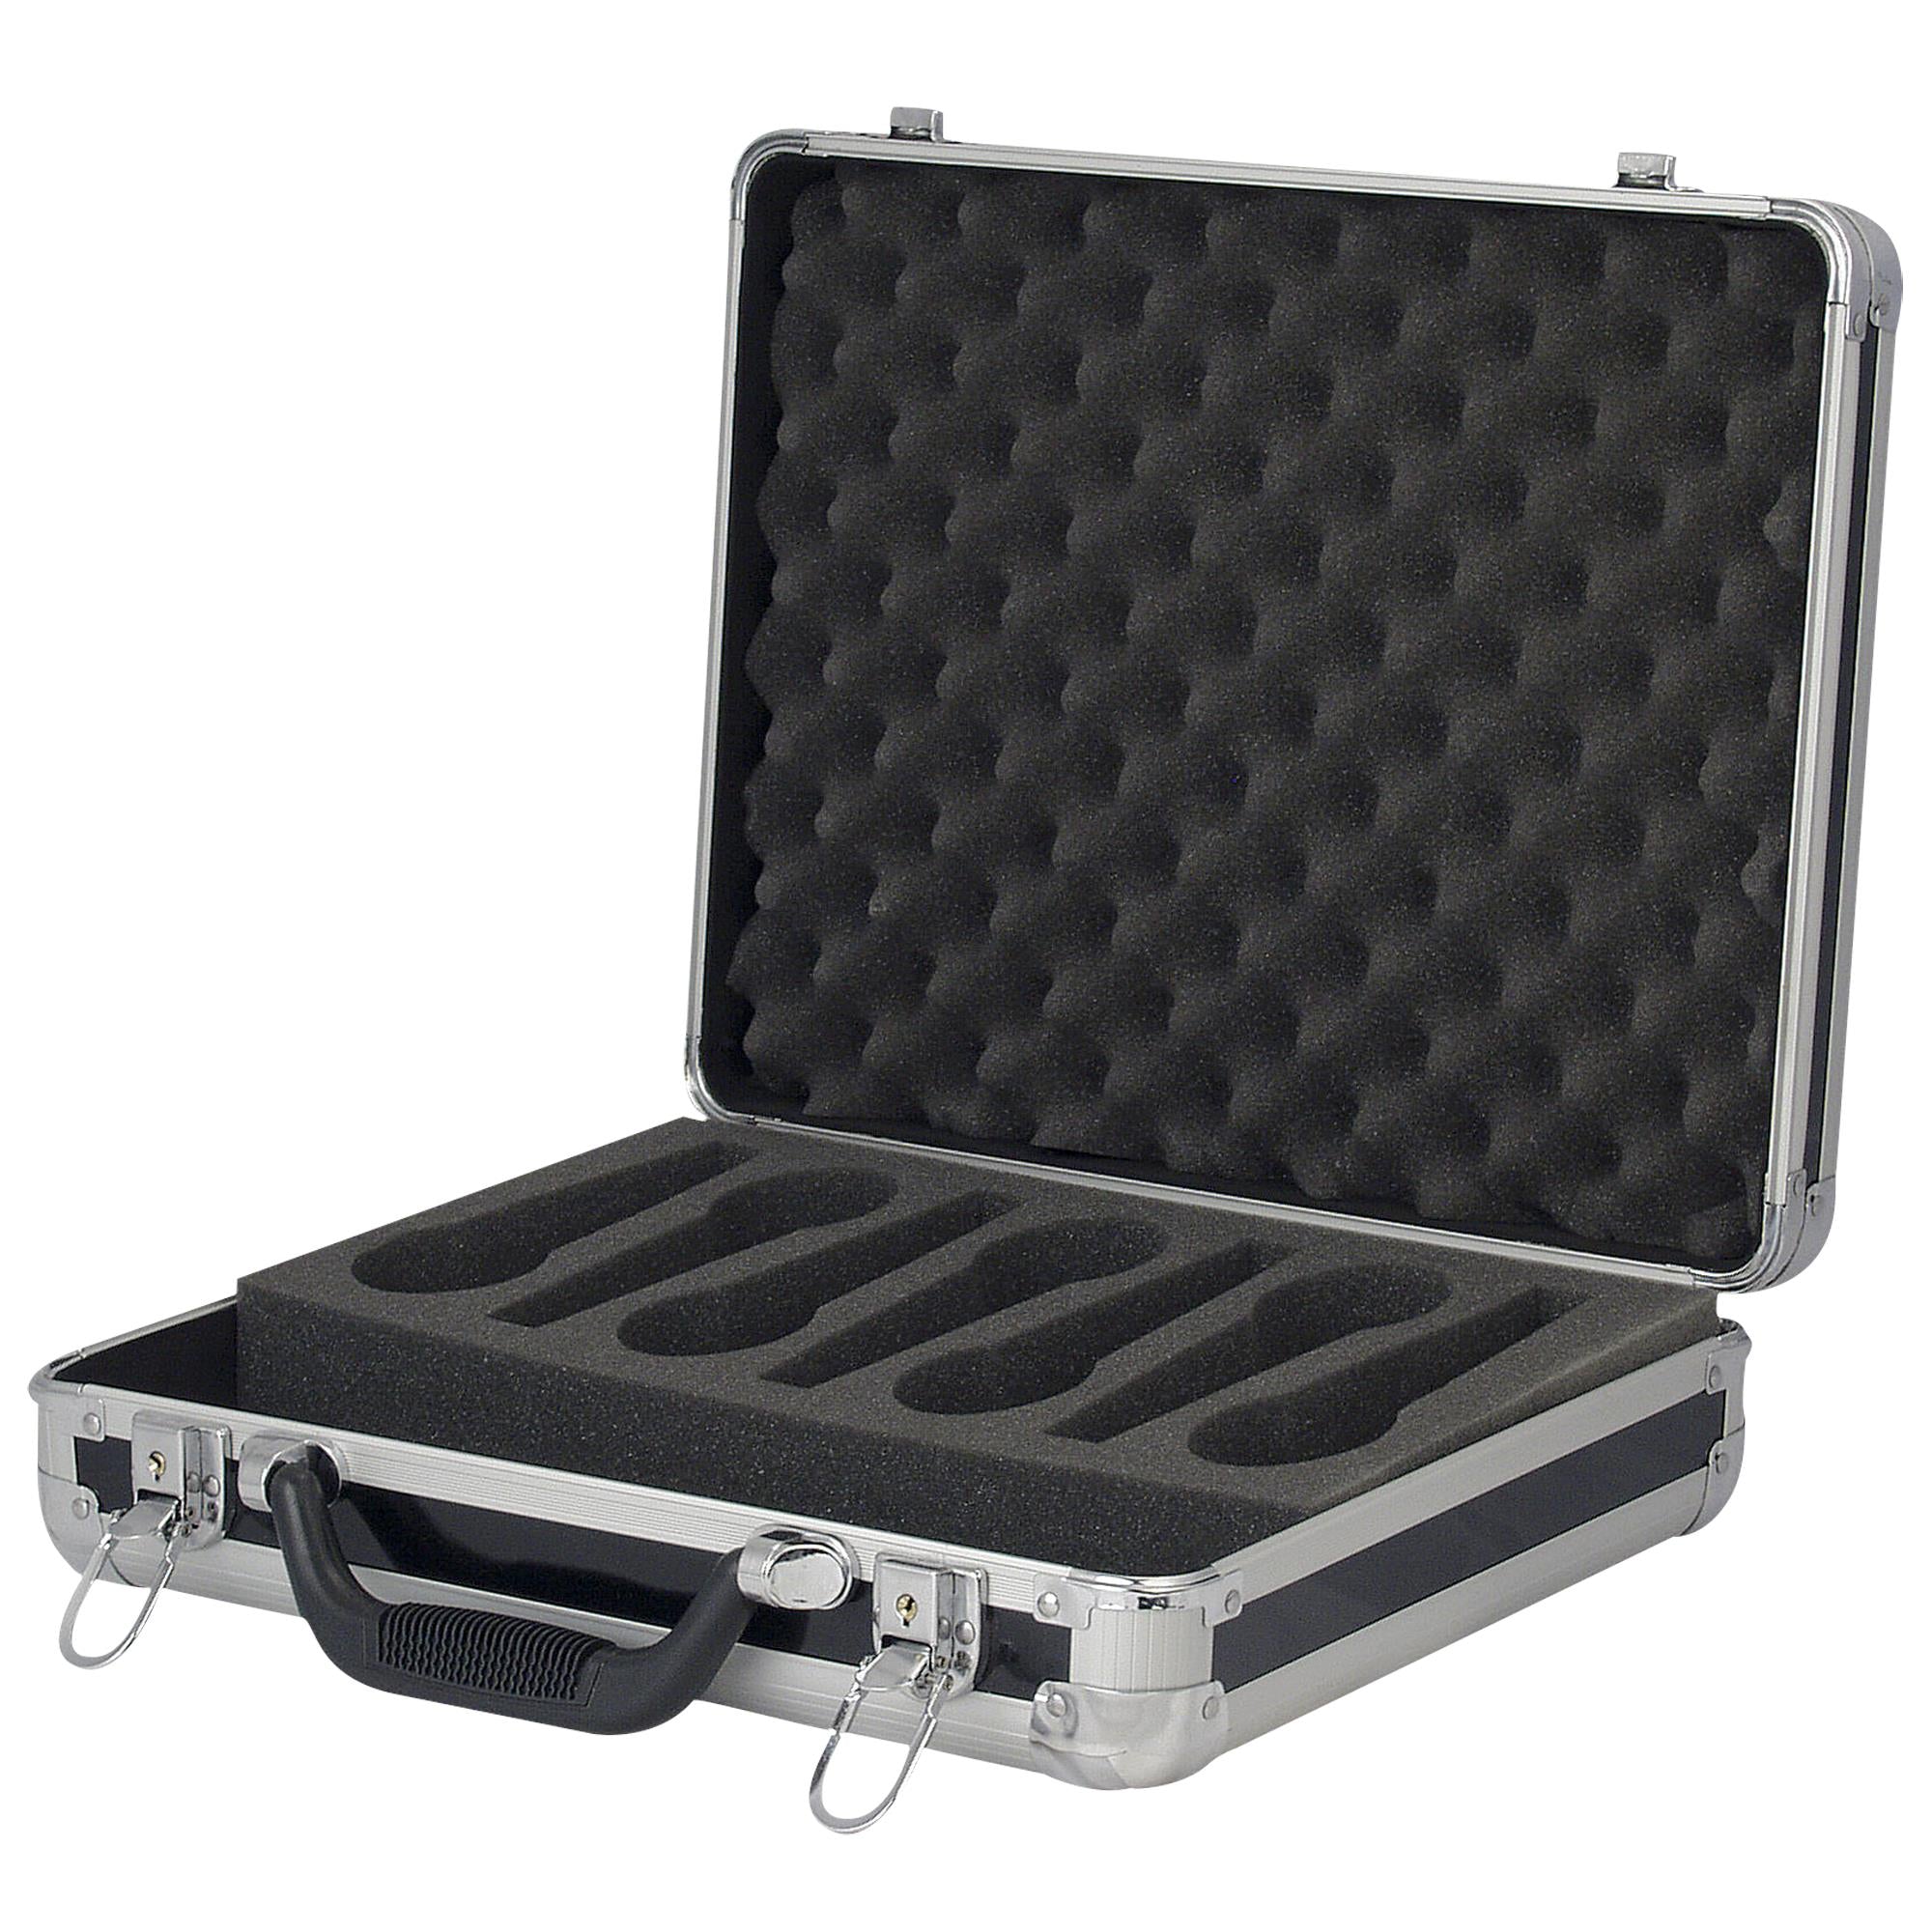 Showgear Flight Case for 7 Microphones With accessory compartment and preformed foam